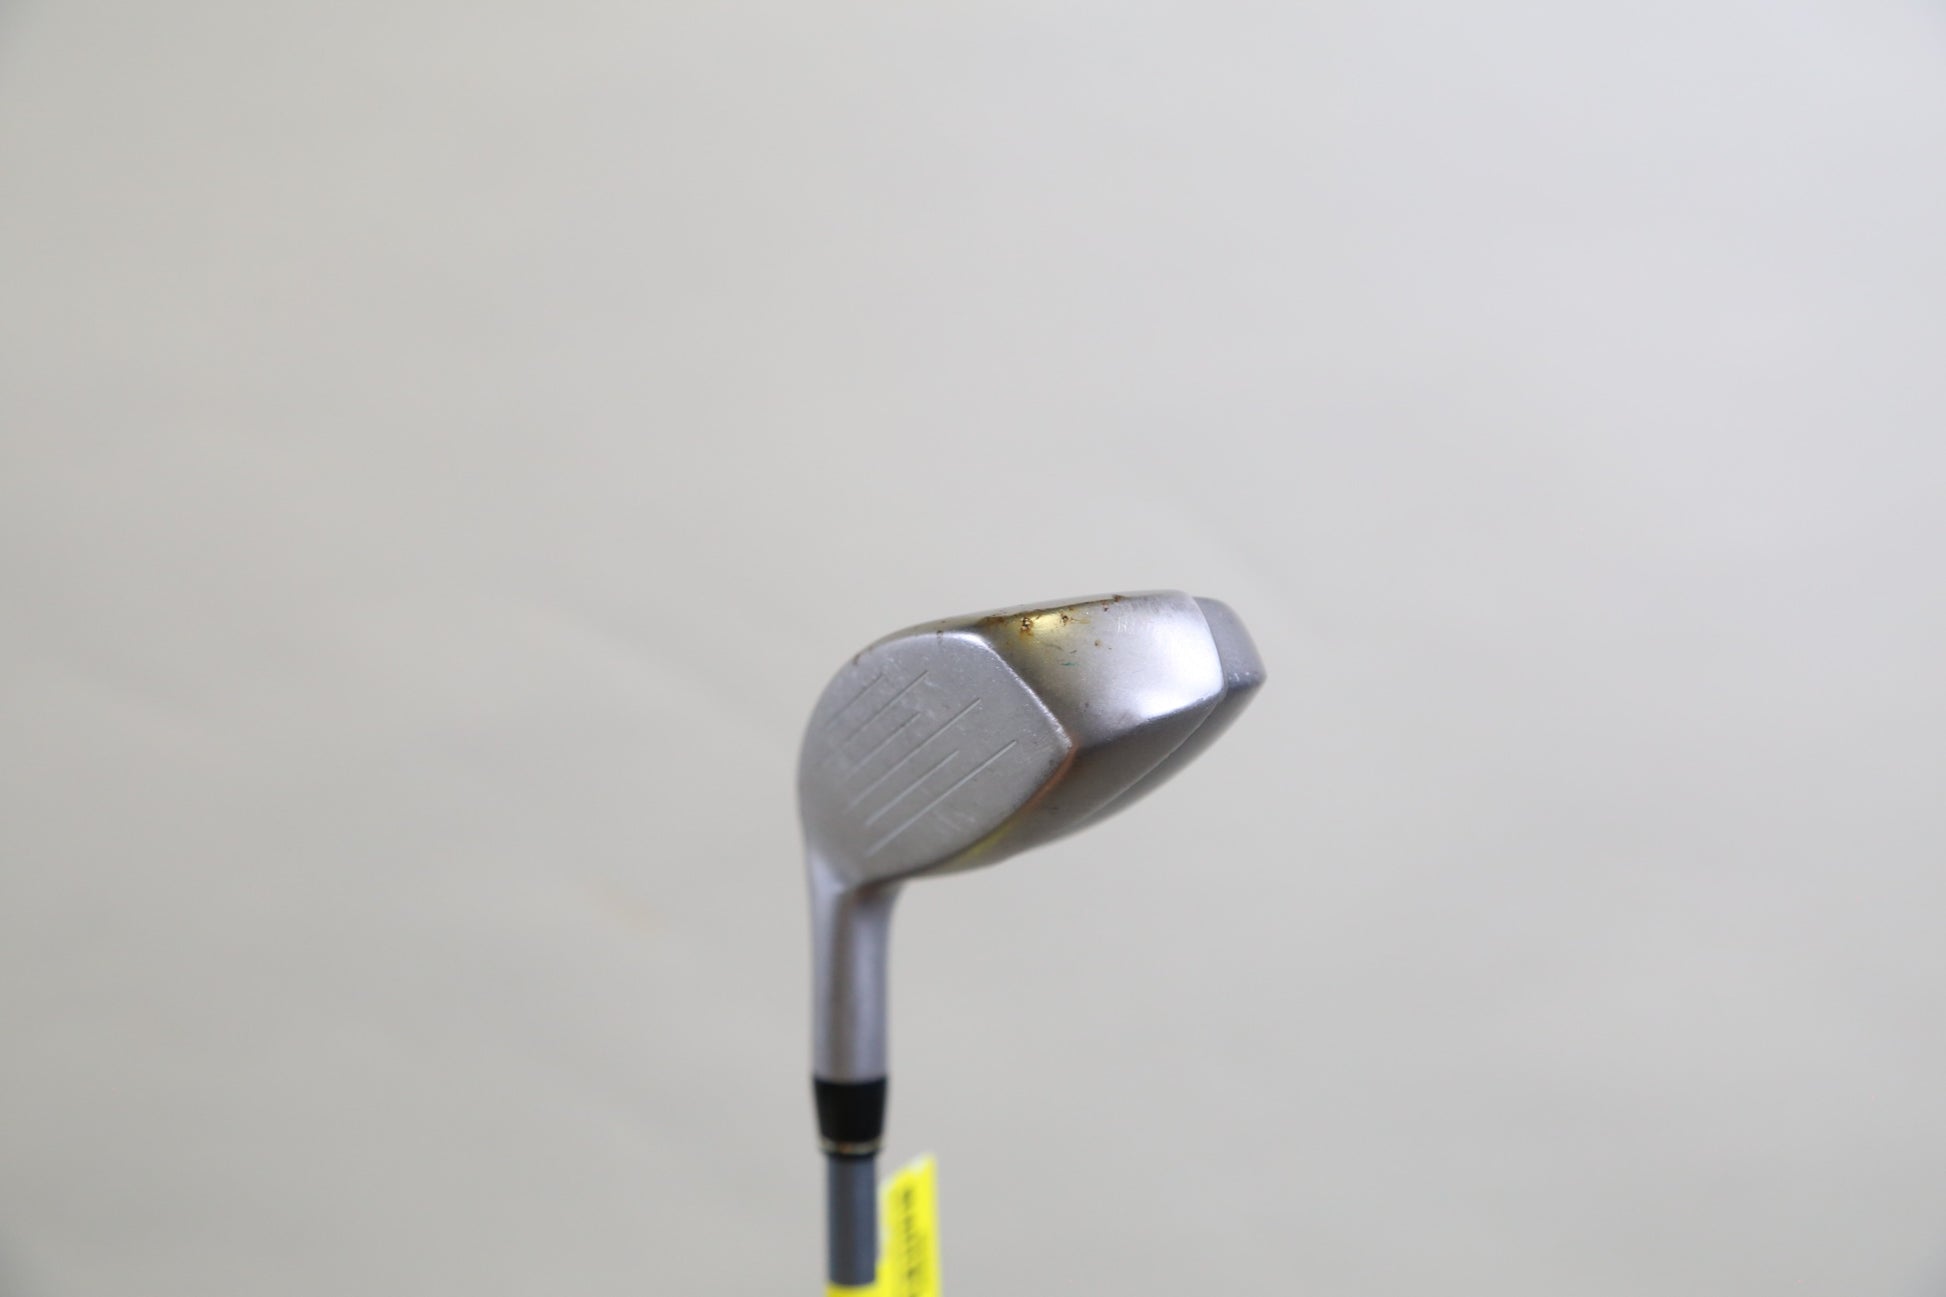 Used TaylorMade Rescue Mid 5H Hybrid - Right-Handed - 25 Degrees - Ladies Flex-Next Round